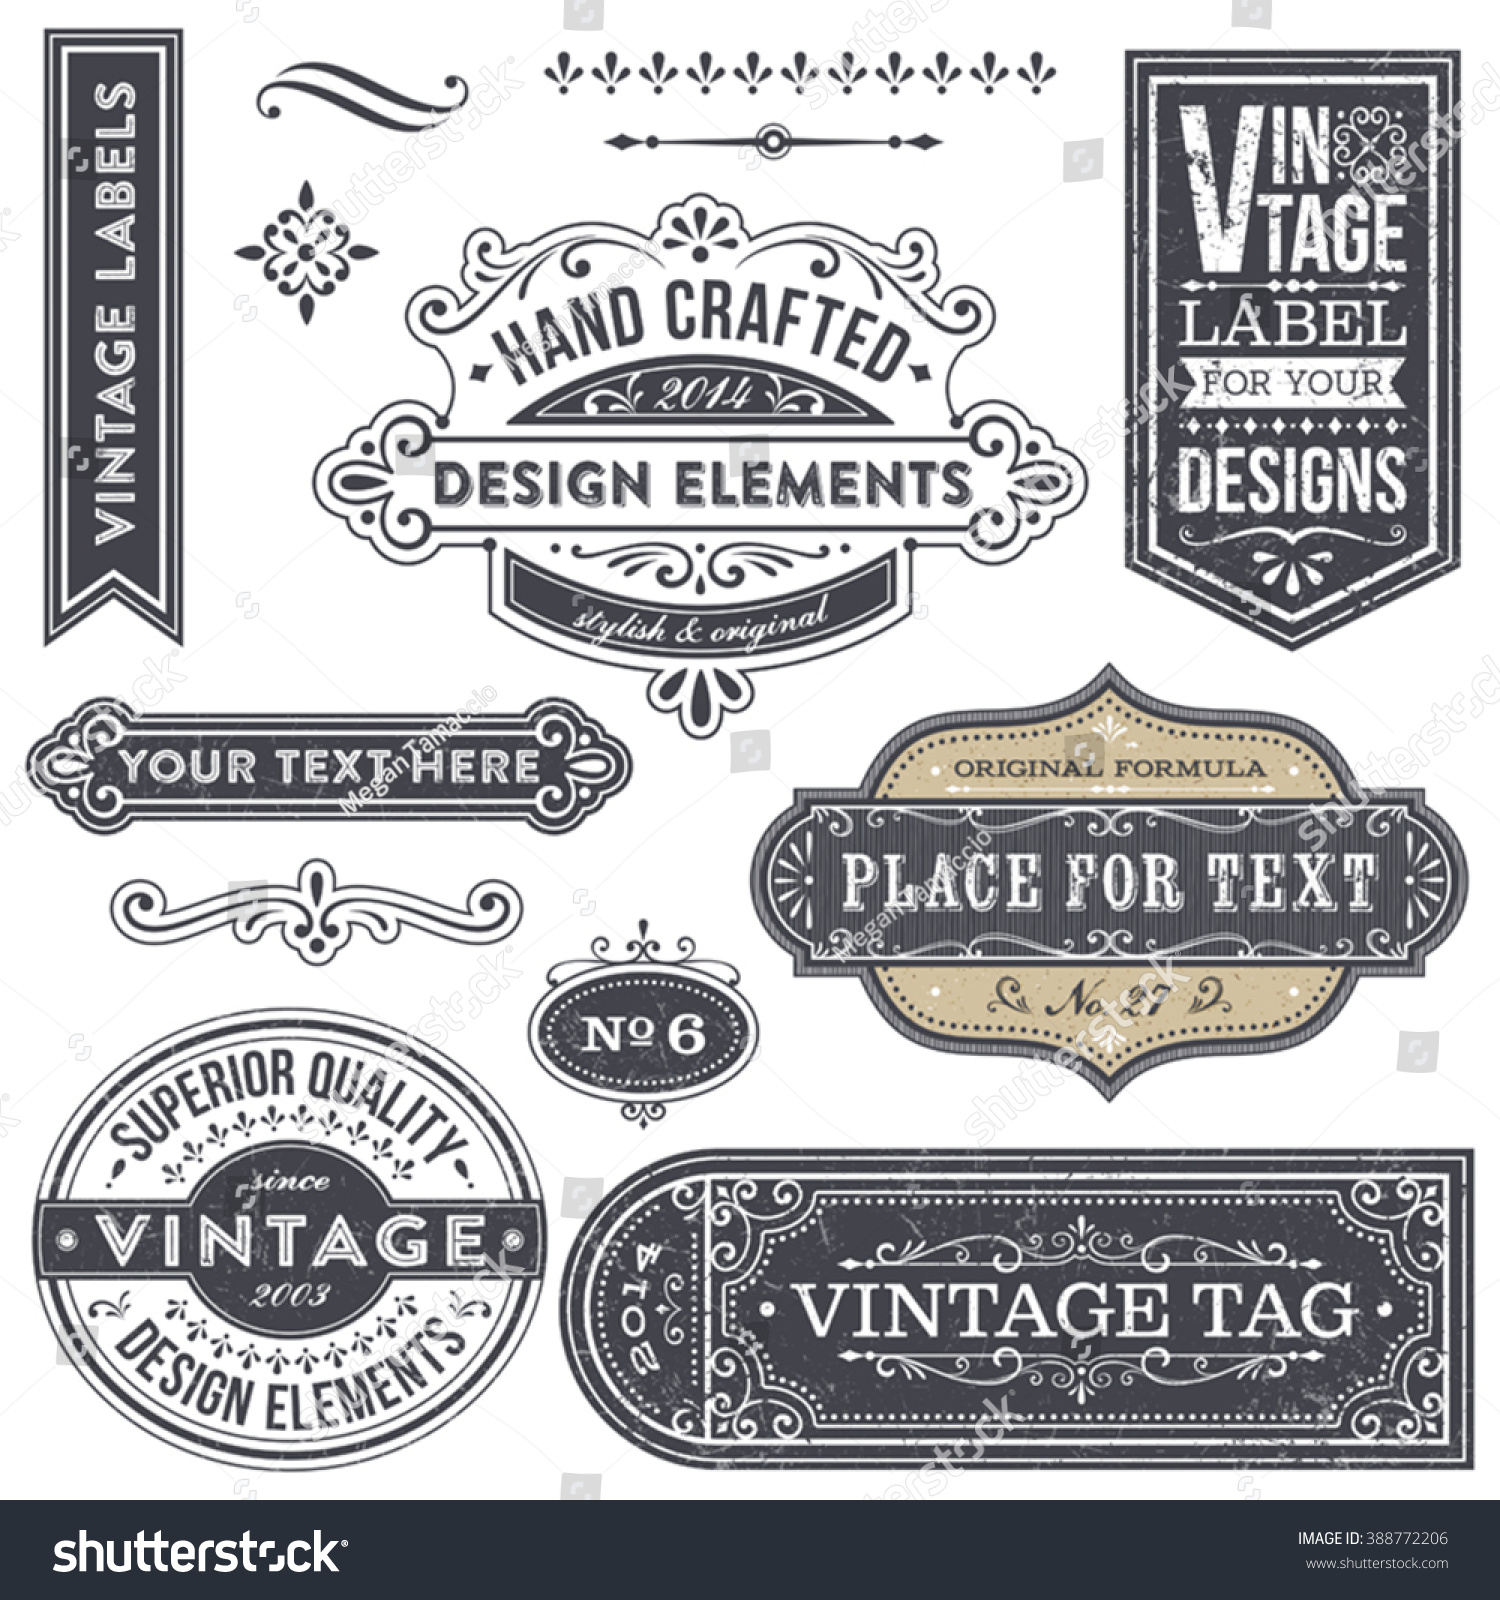 1,747 Vintage apothecary labels Images, Stock Photos & Vectors ...